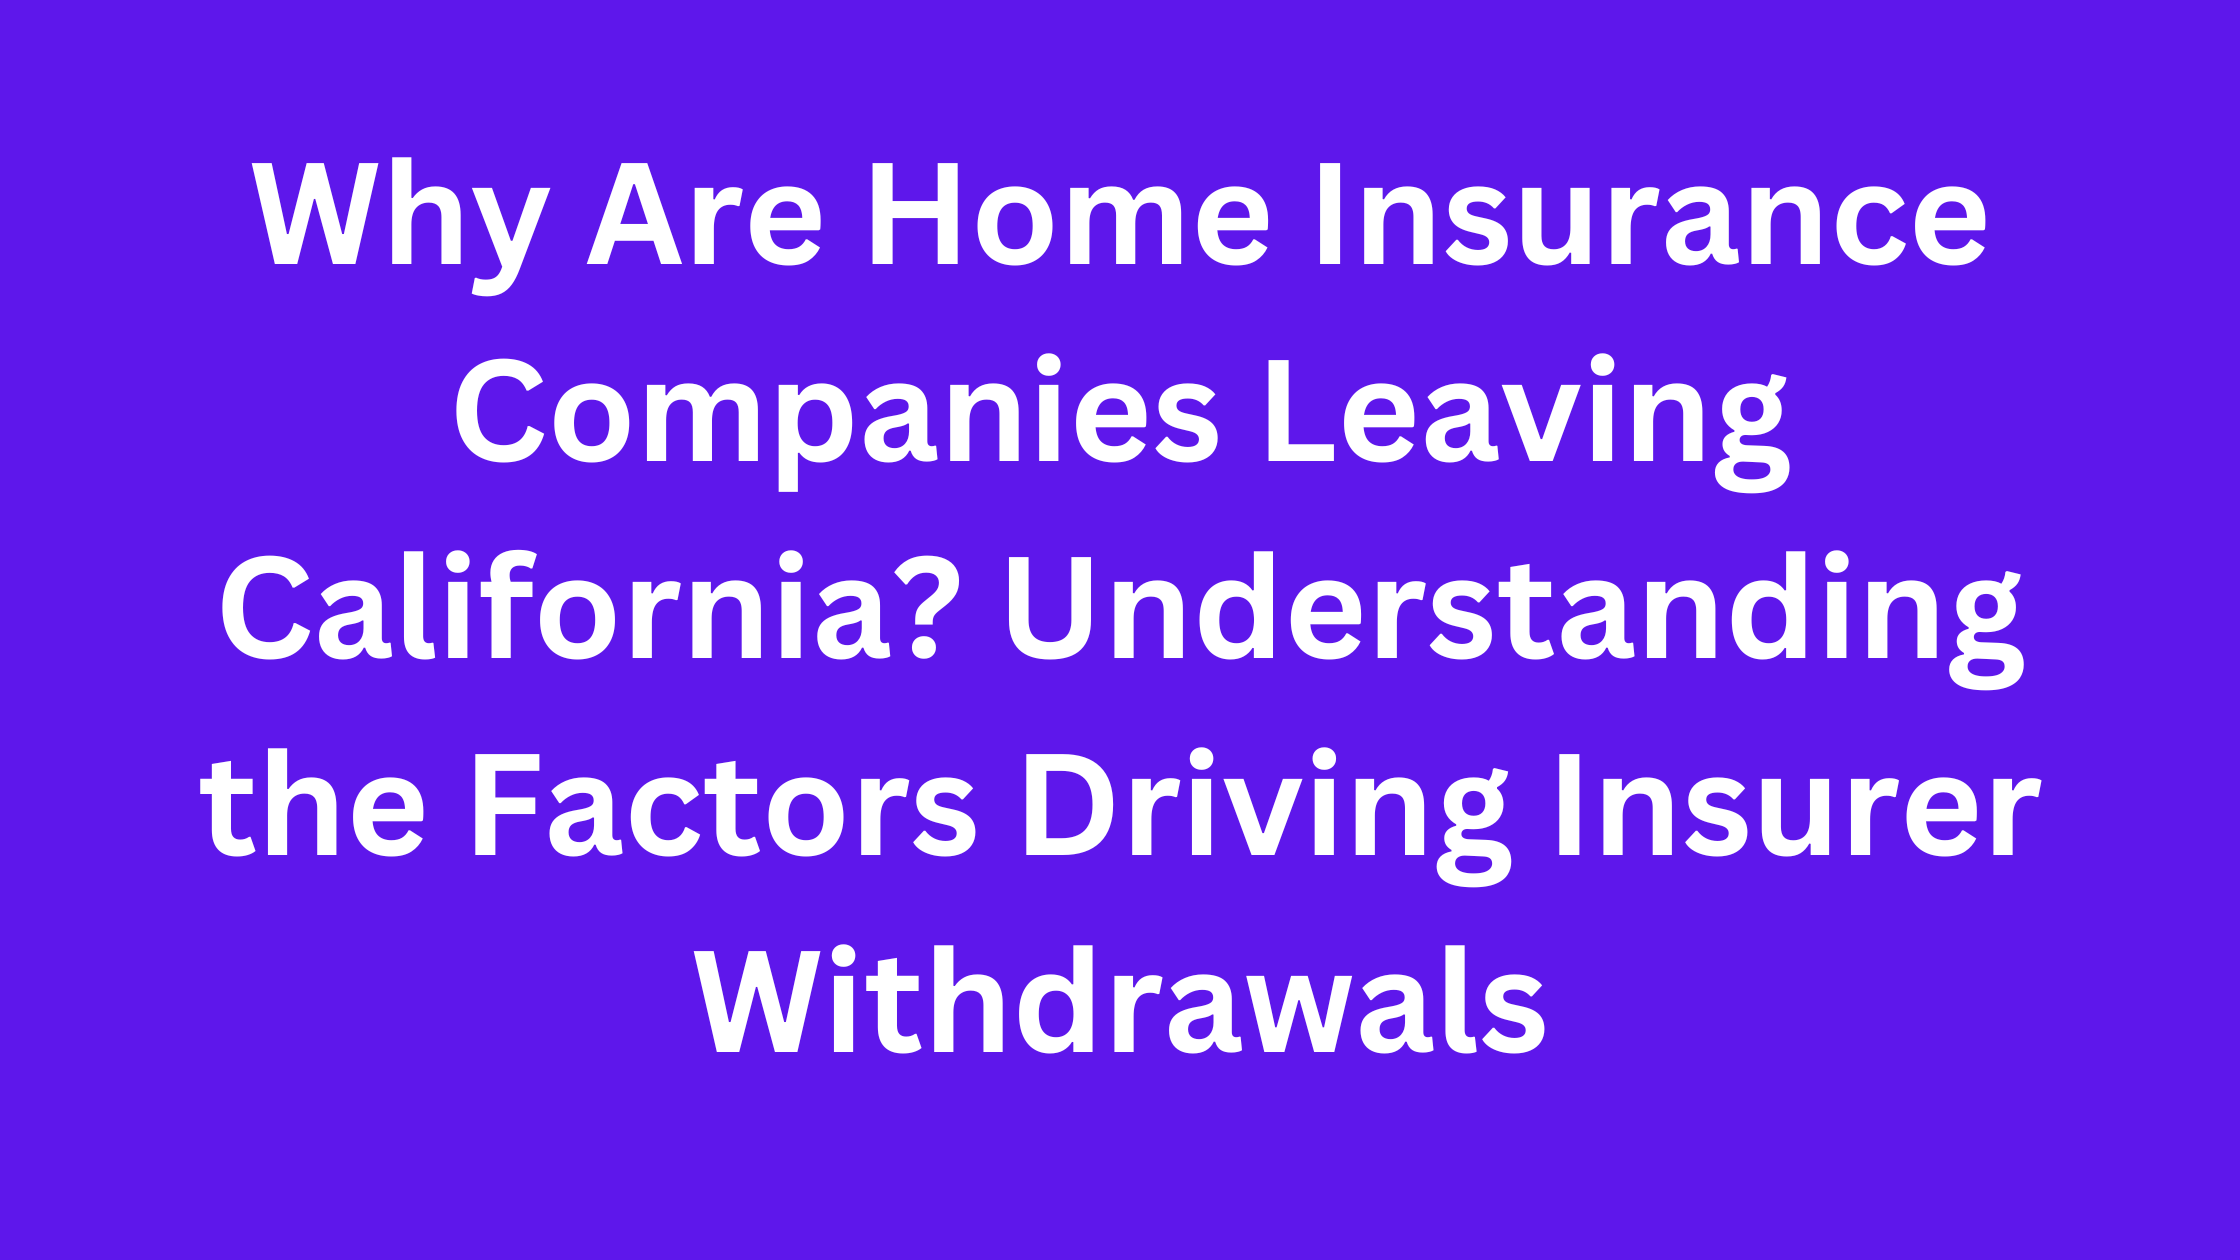 Why Are Home Insurance Companies Leaving California? Understanding the Factors Driving Insurer Withdrawals